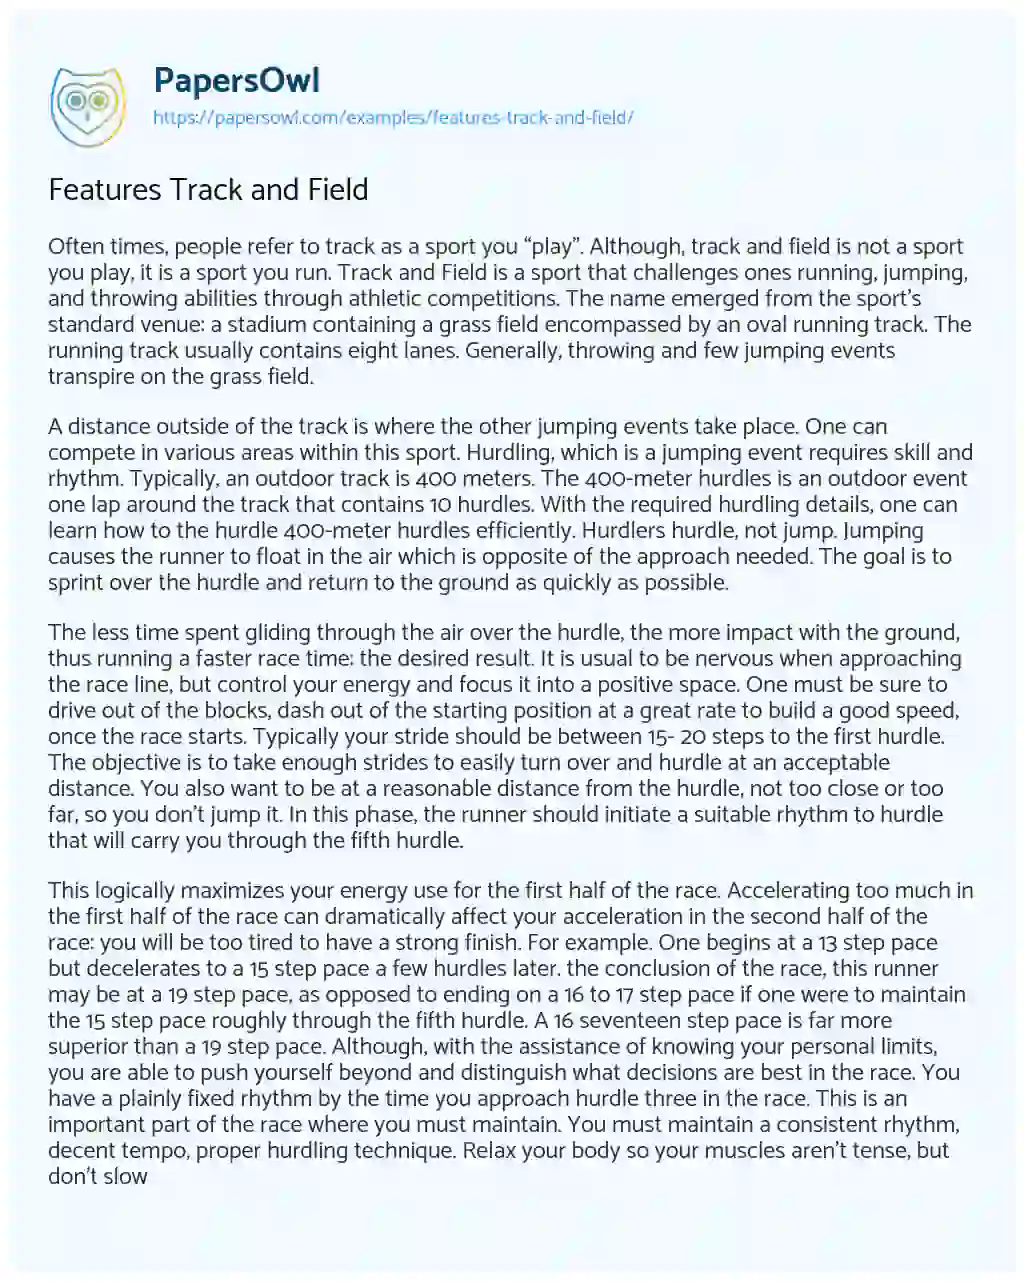 Essay on Features Track and Field